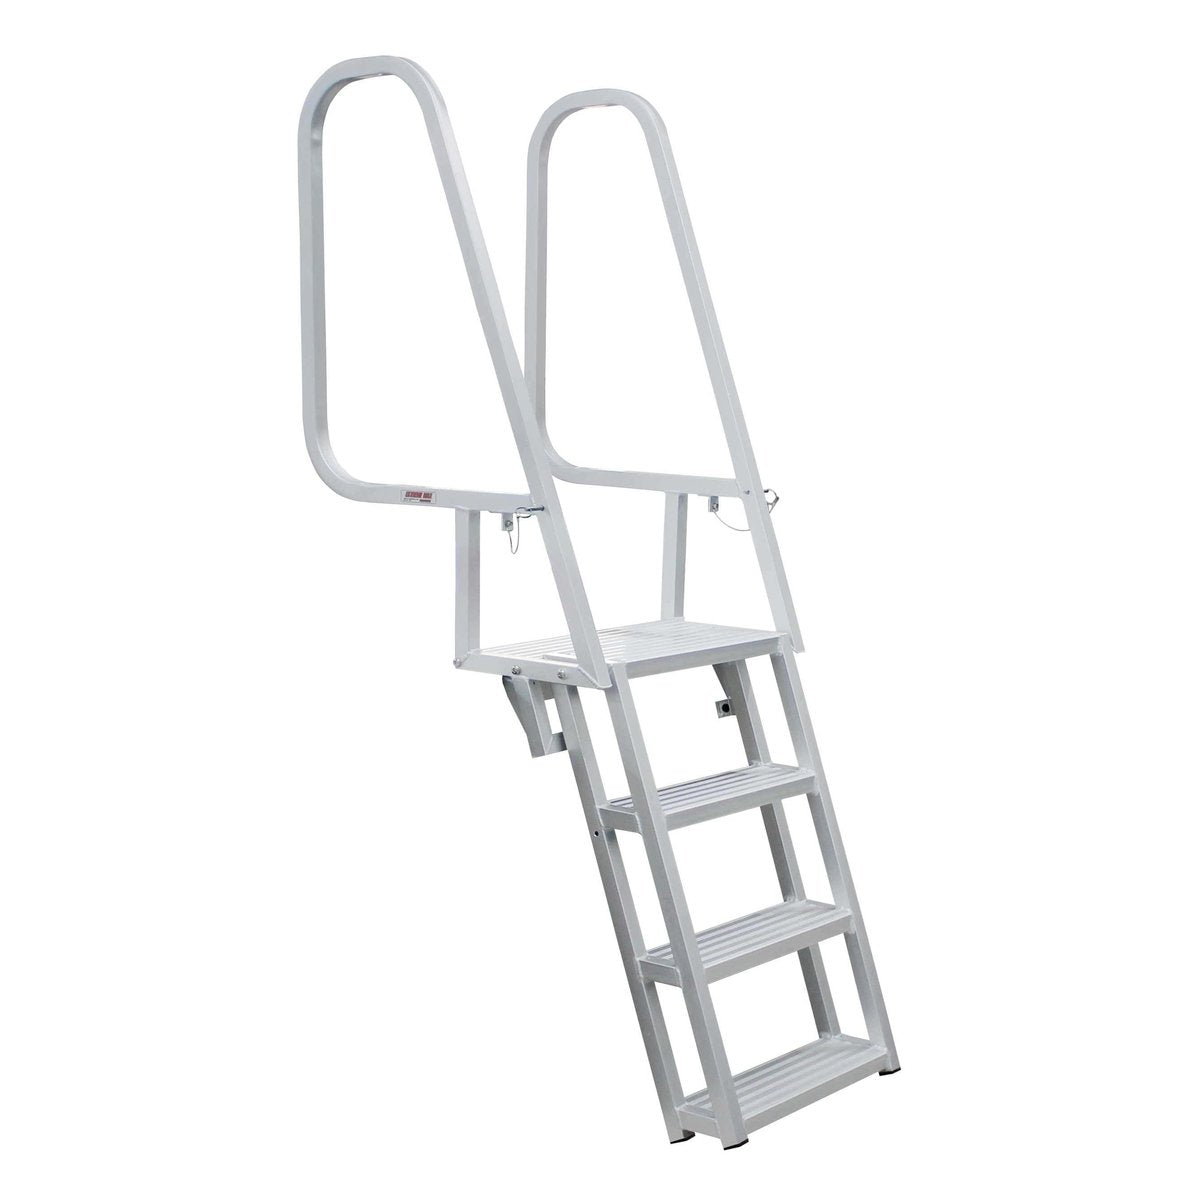 Extreme Max Deluxe Flip-Up Dock Ladder with Welded 4-Step #3005.3913